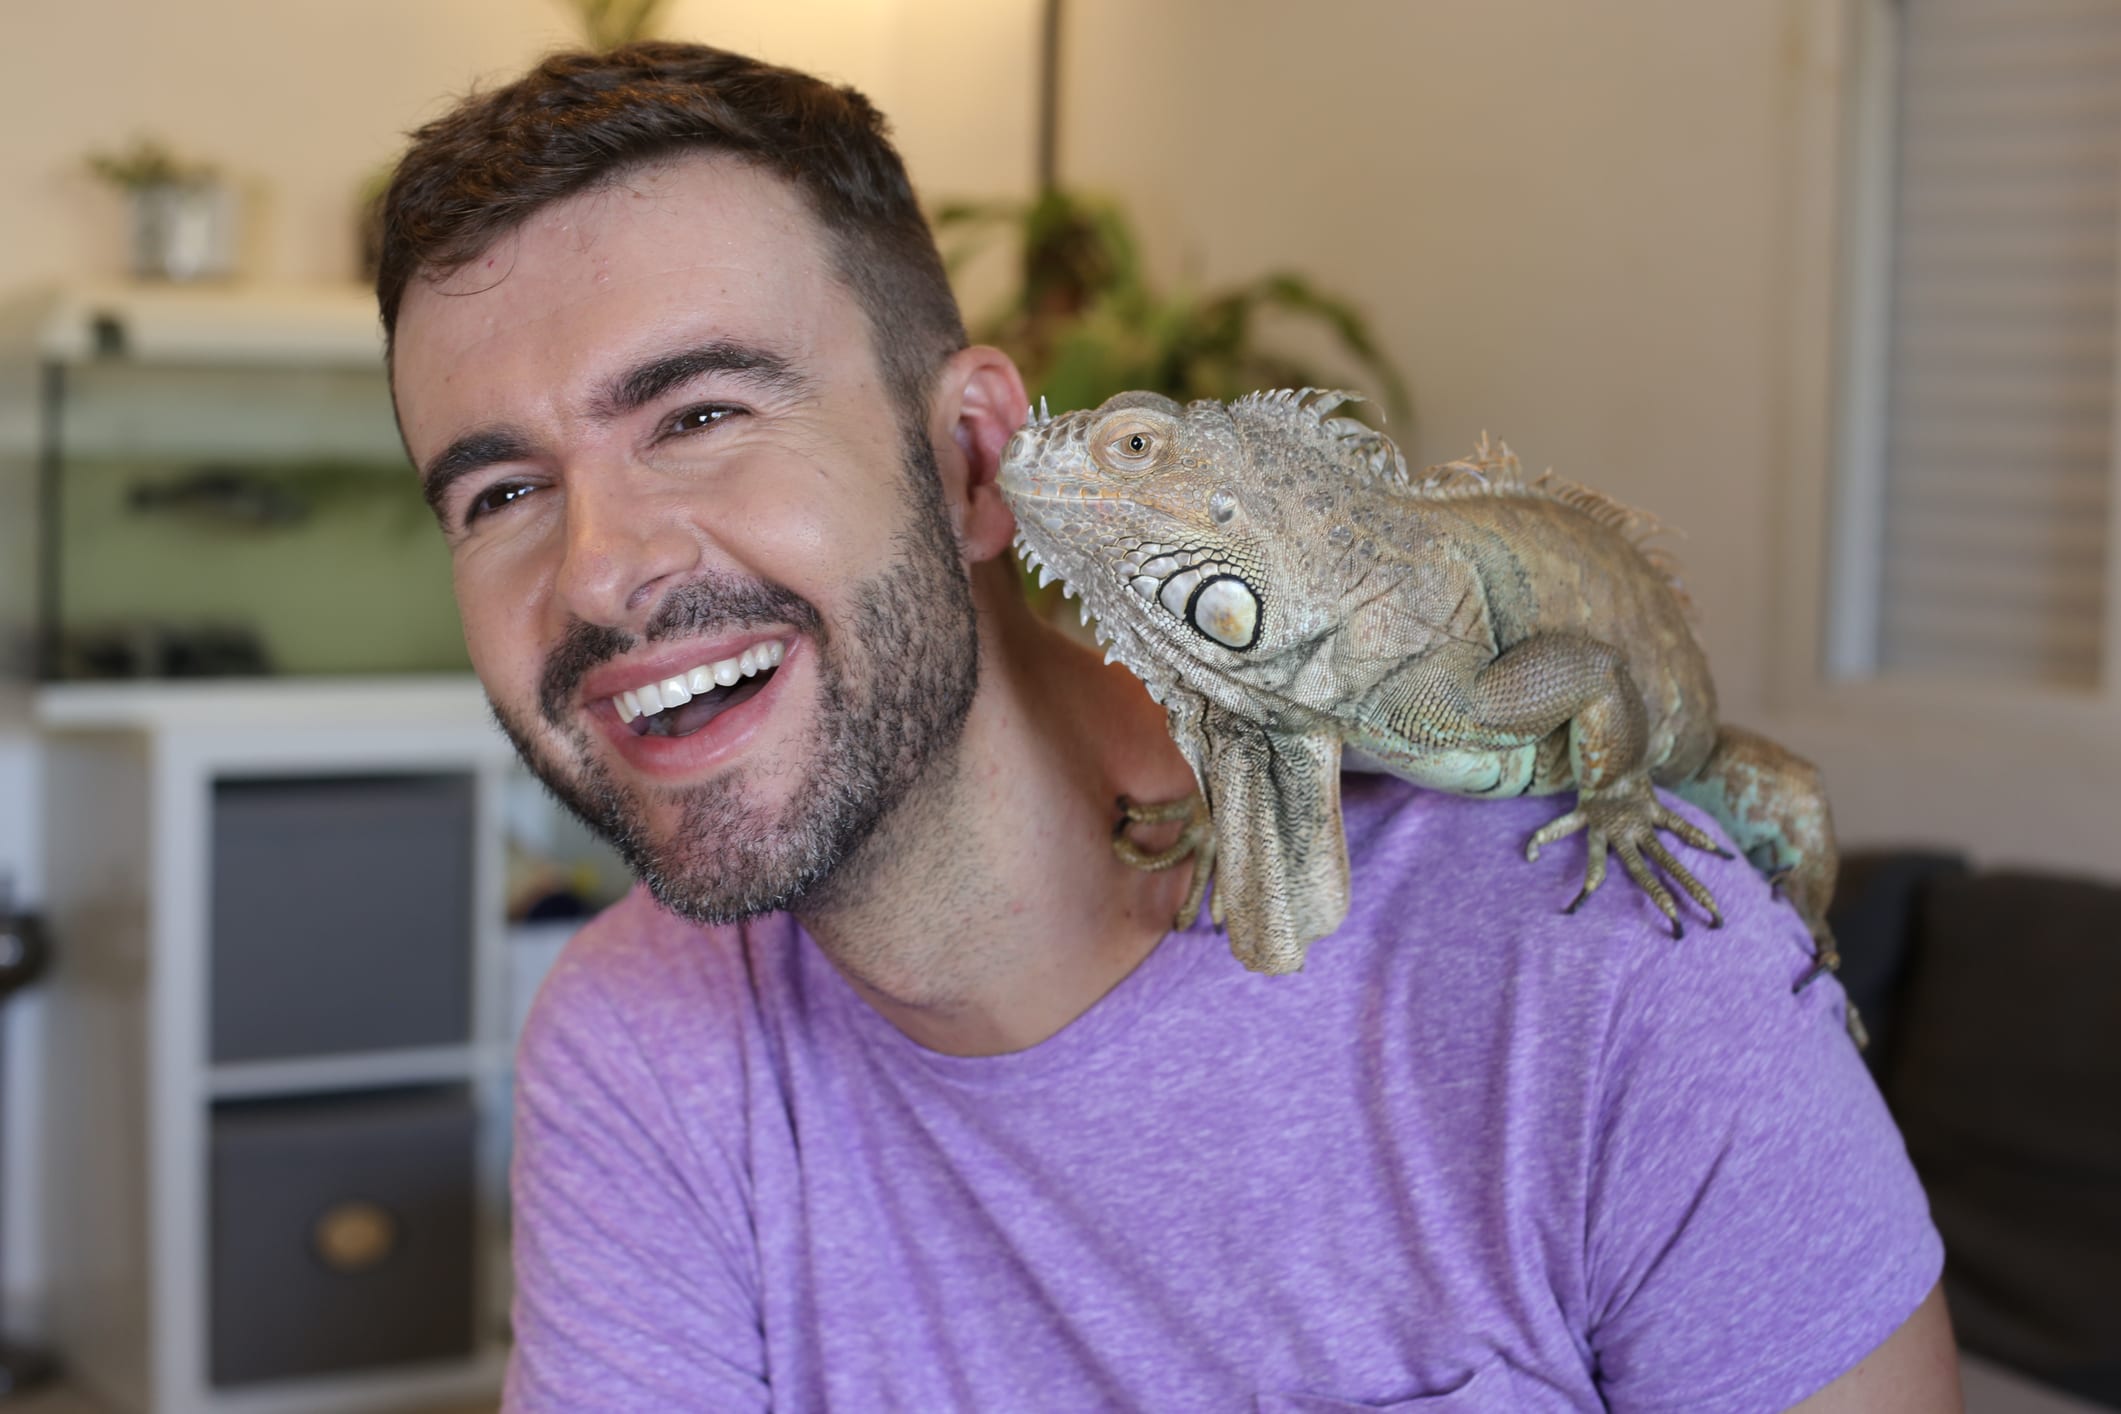 Young man and his gorgeous green iguana pet